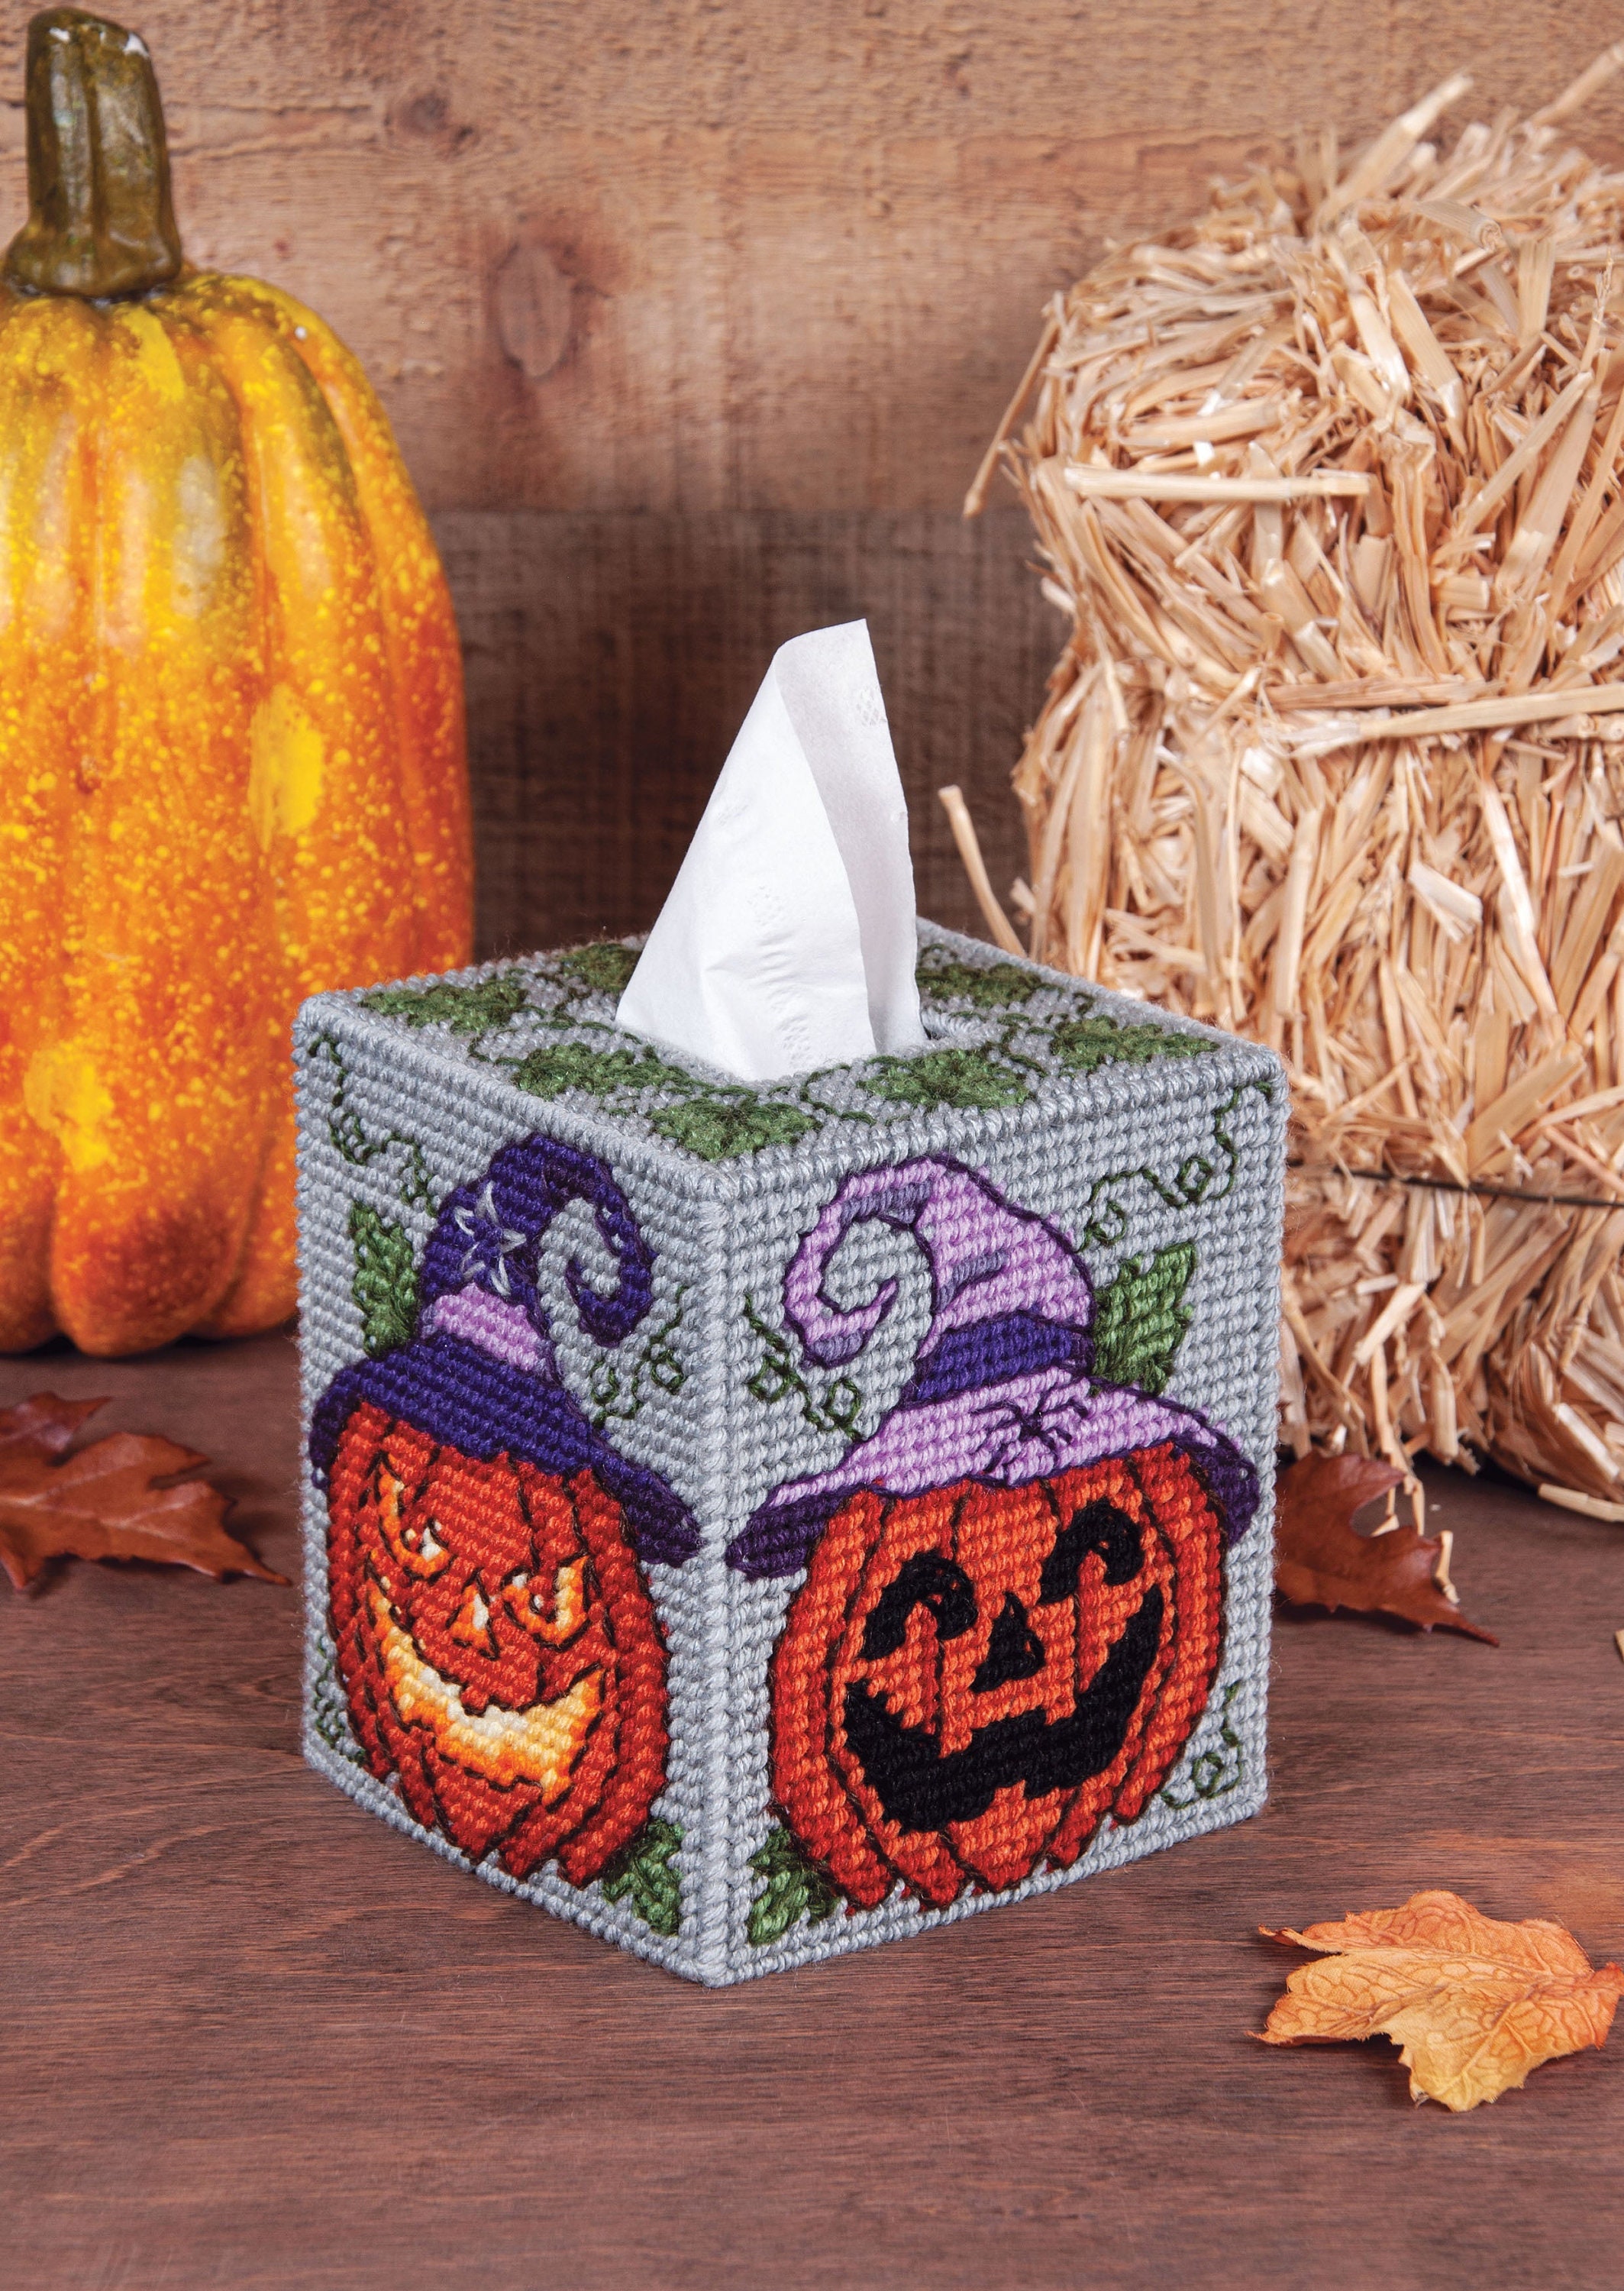 Mary Maxim Plastic Canvas Kits, For a fun fall project we are